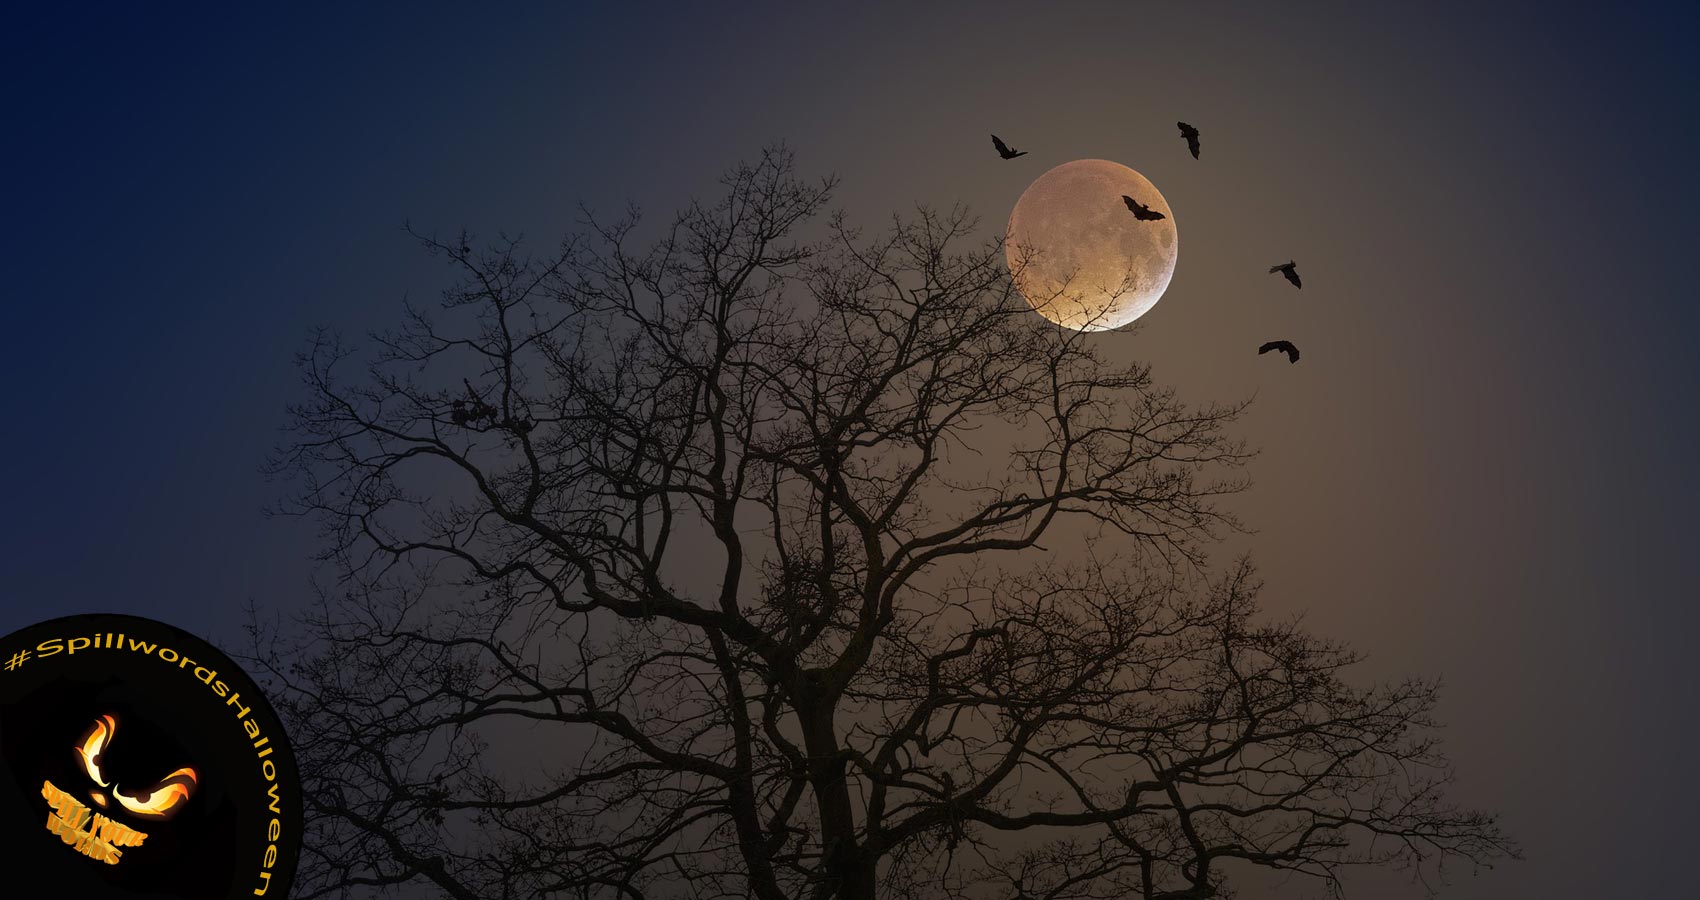 Ode To Halloween, poetry by Franci Eugenia Hoffman at Spillwords.com